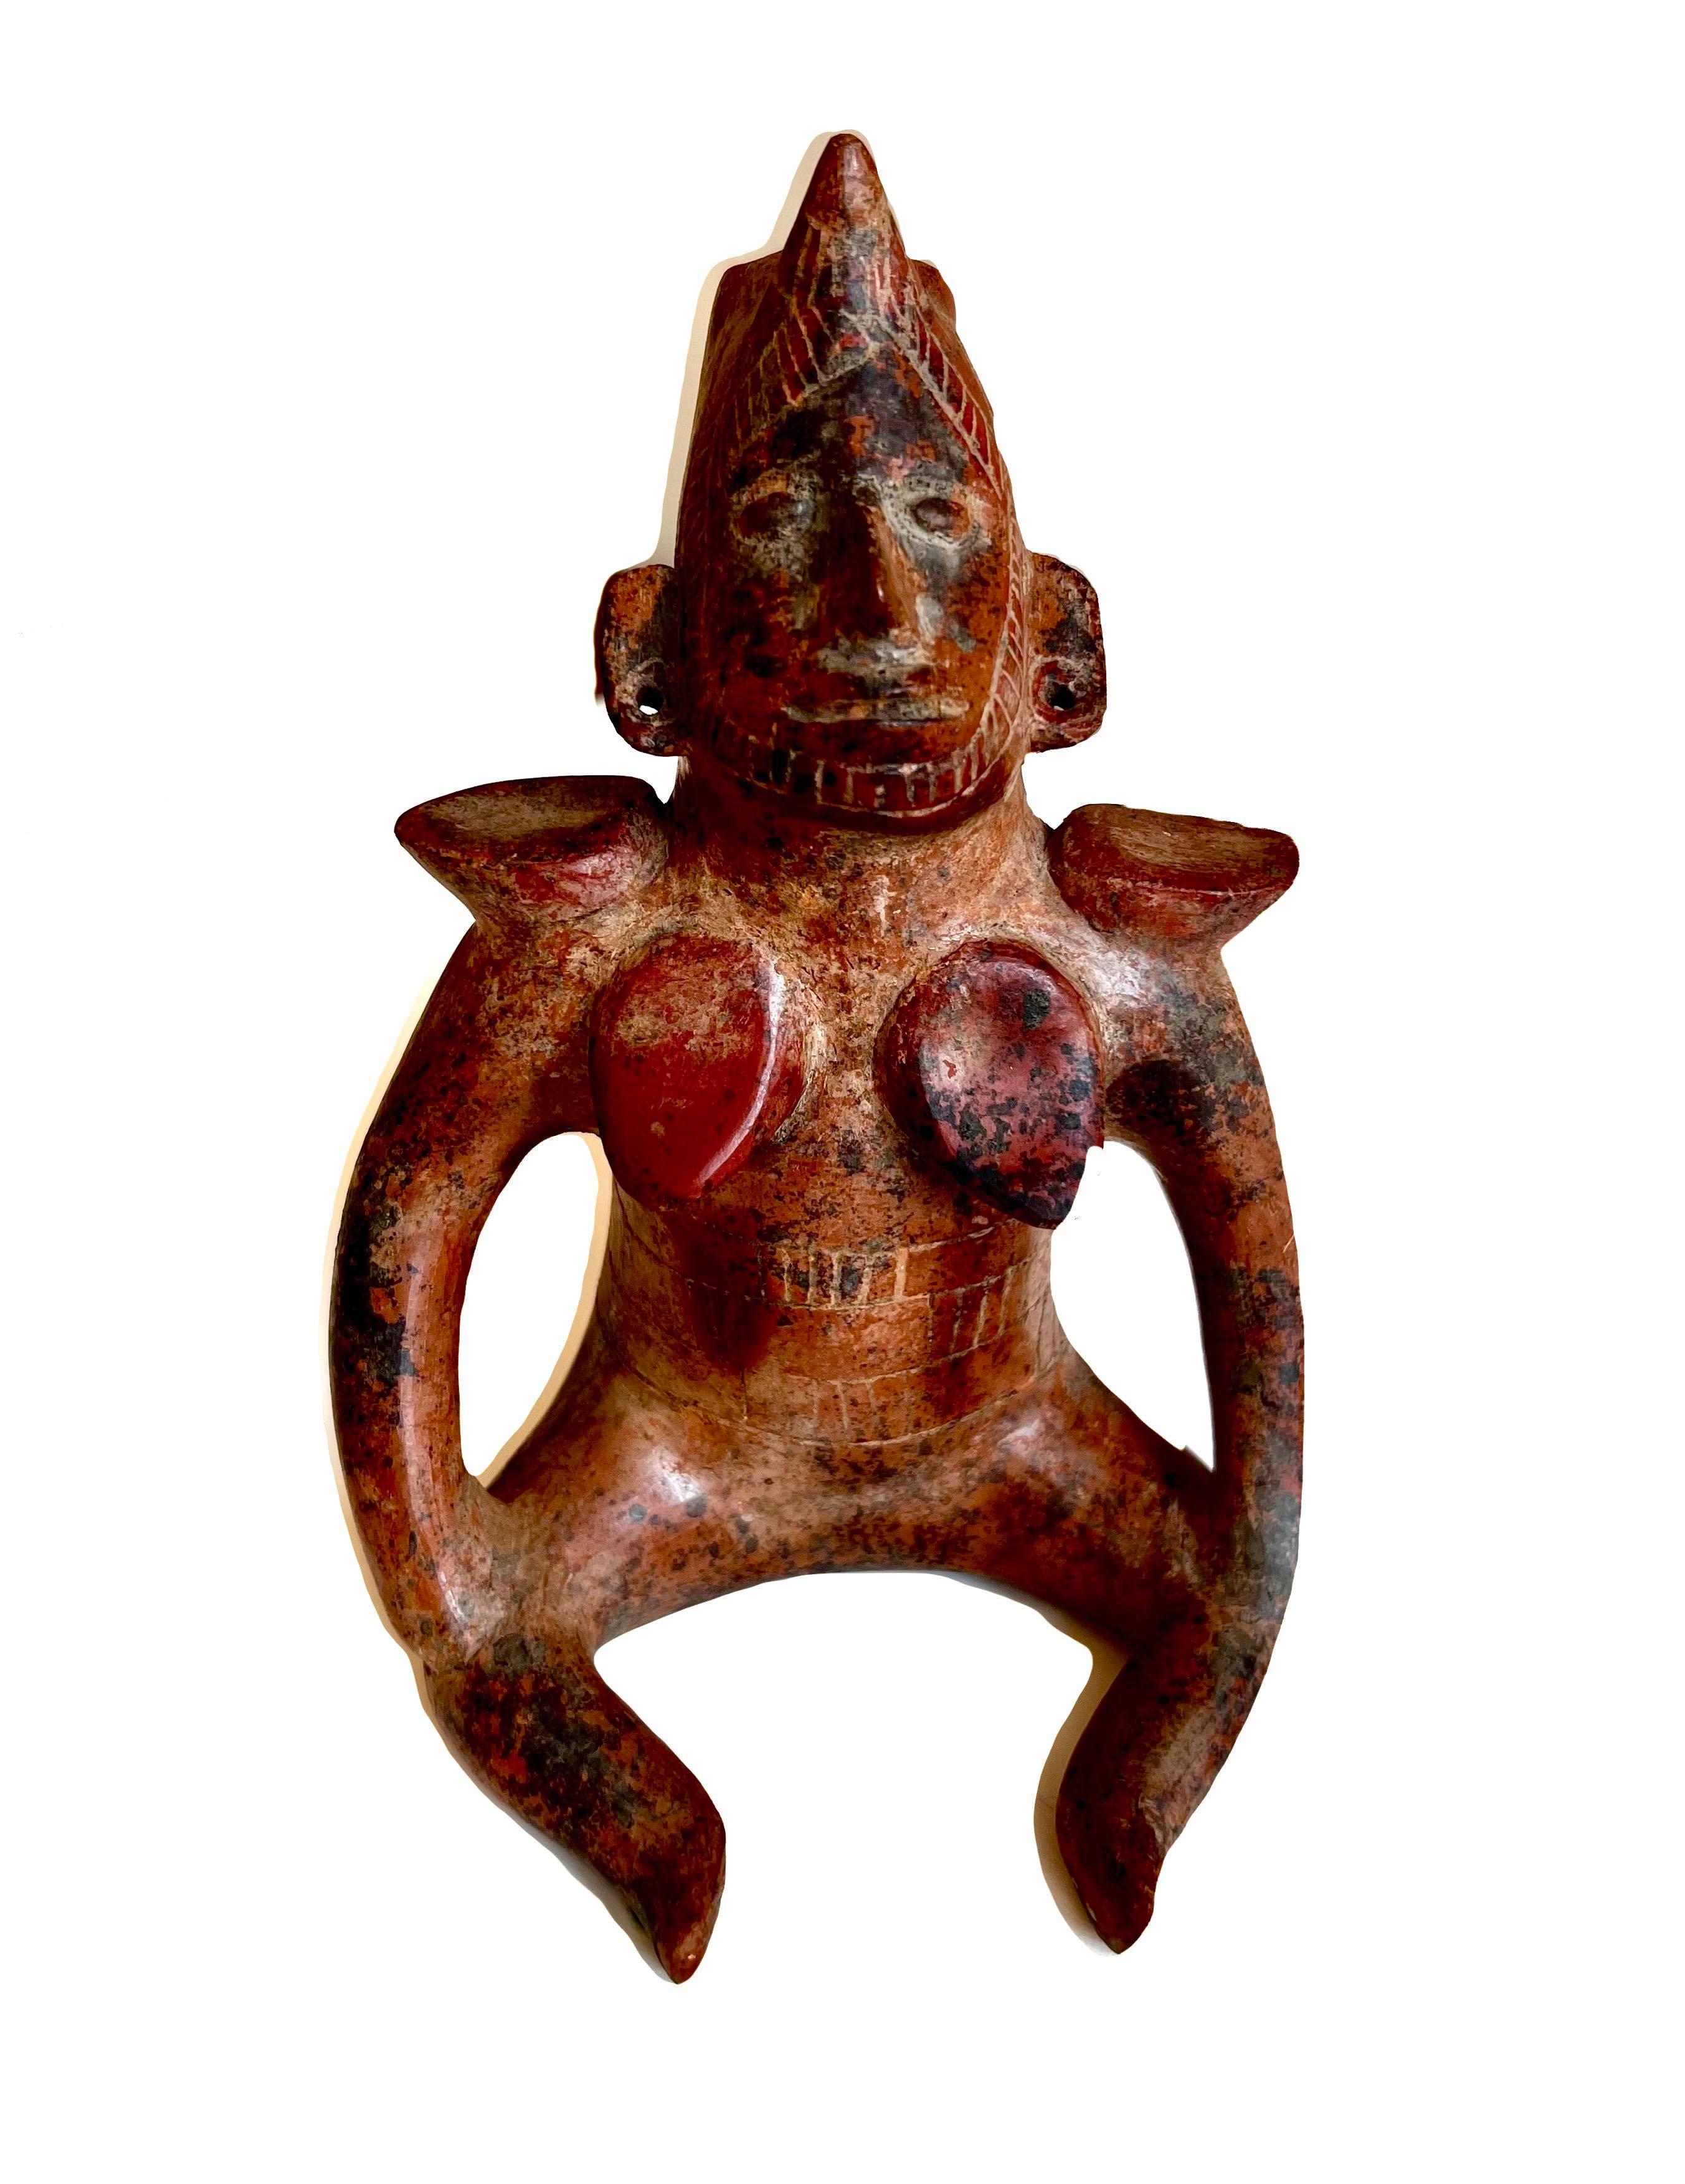 Clay Sculpture in Pre-Colombian Style Reproduction